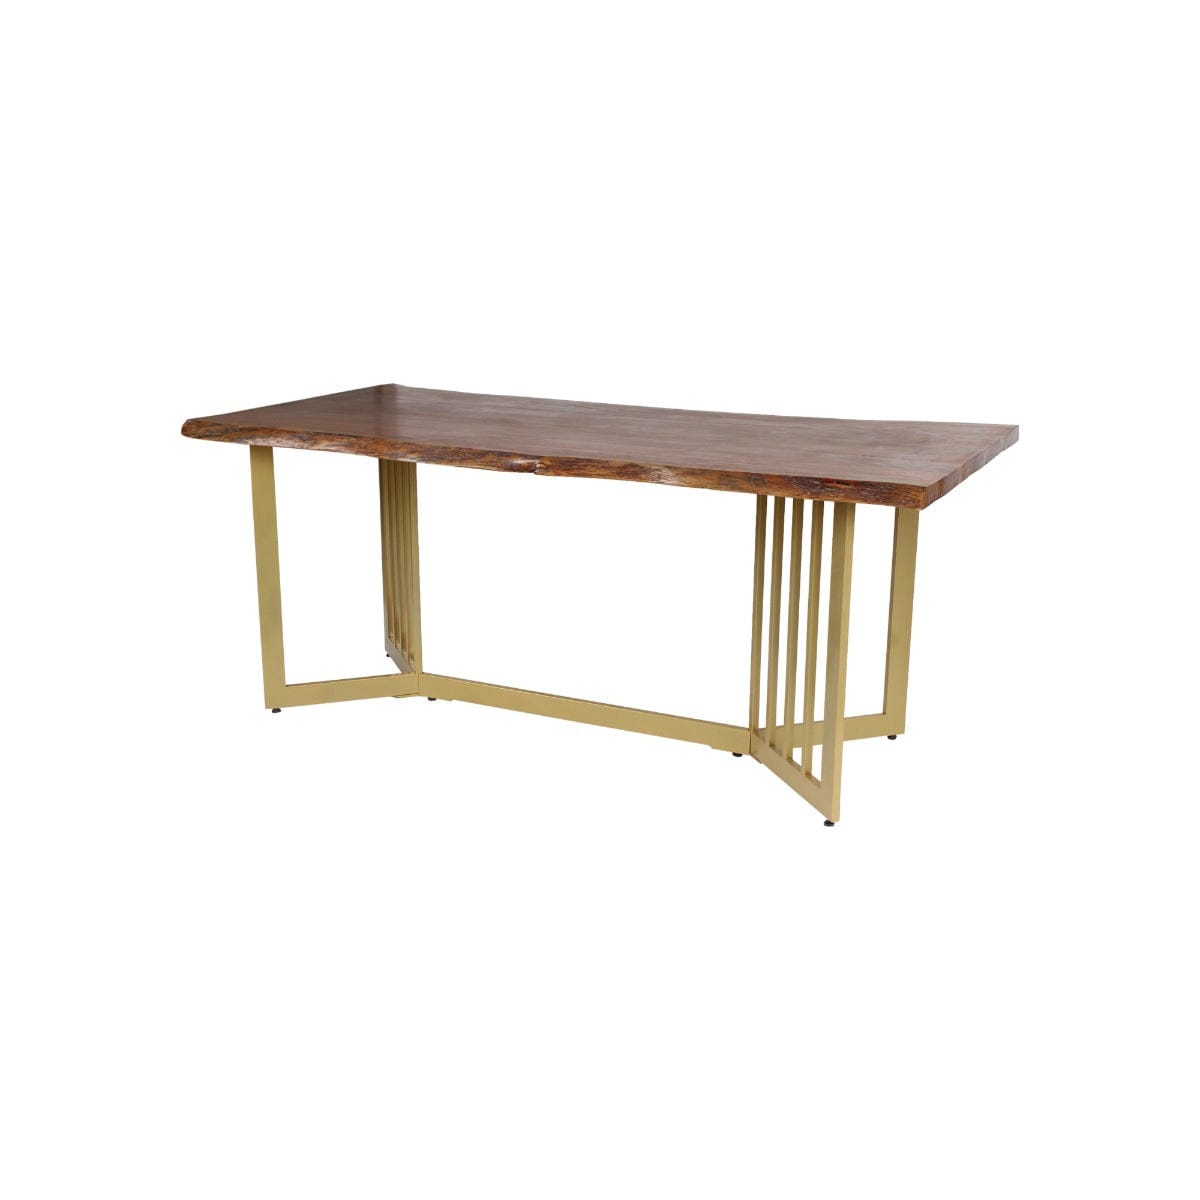 Kitson 6 Seater Wooden Dining Table In Gold Finish